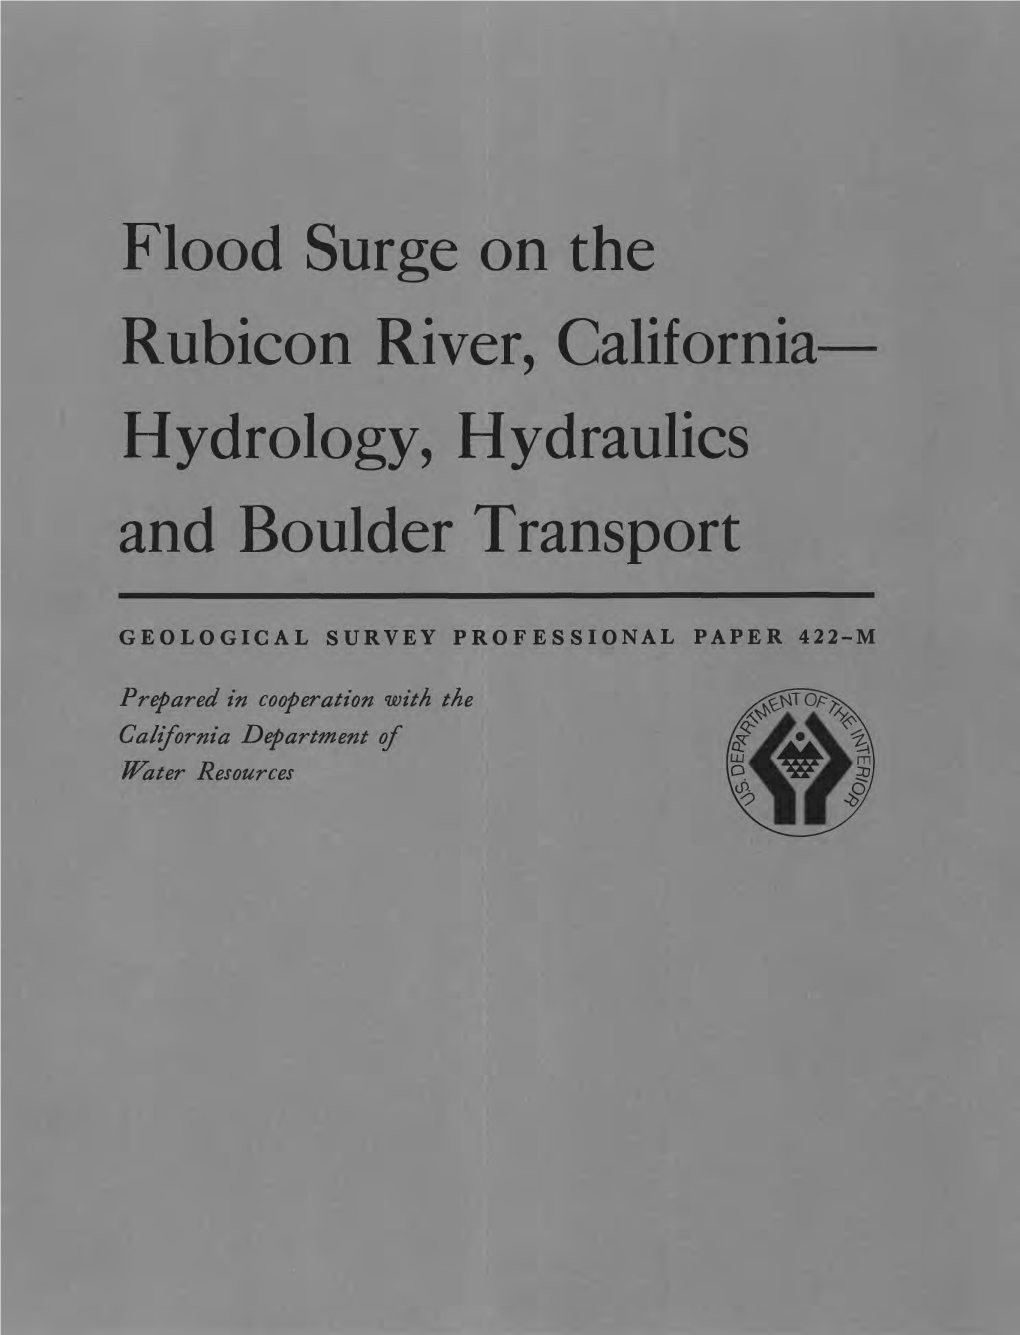 Flood Surge on the Rubicon River, California Hydrology, Hydraulics and Boulder Transport